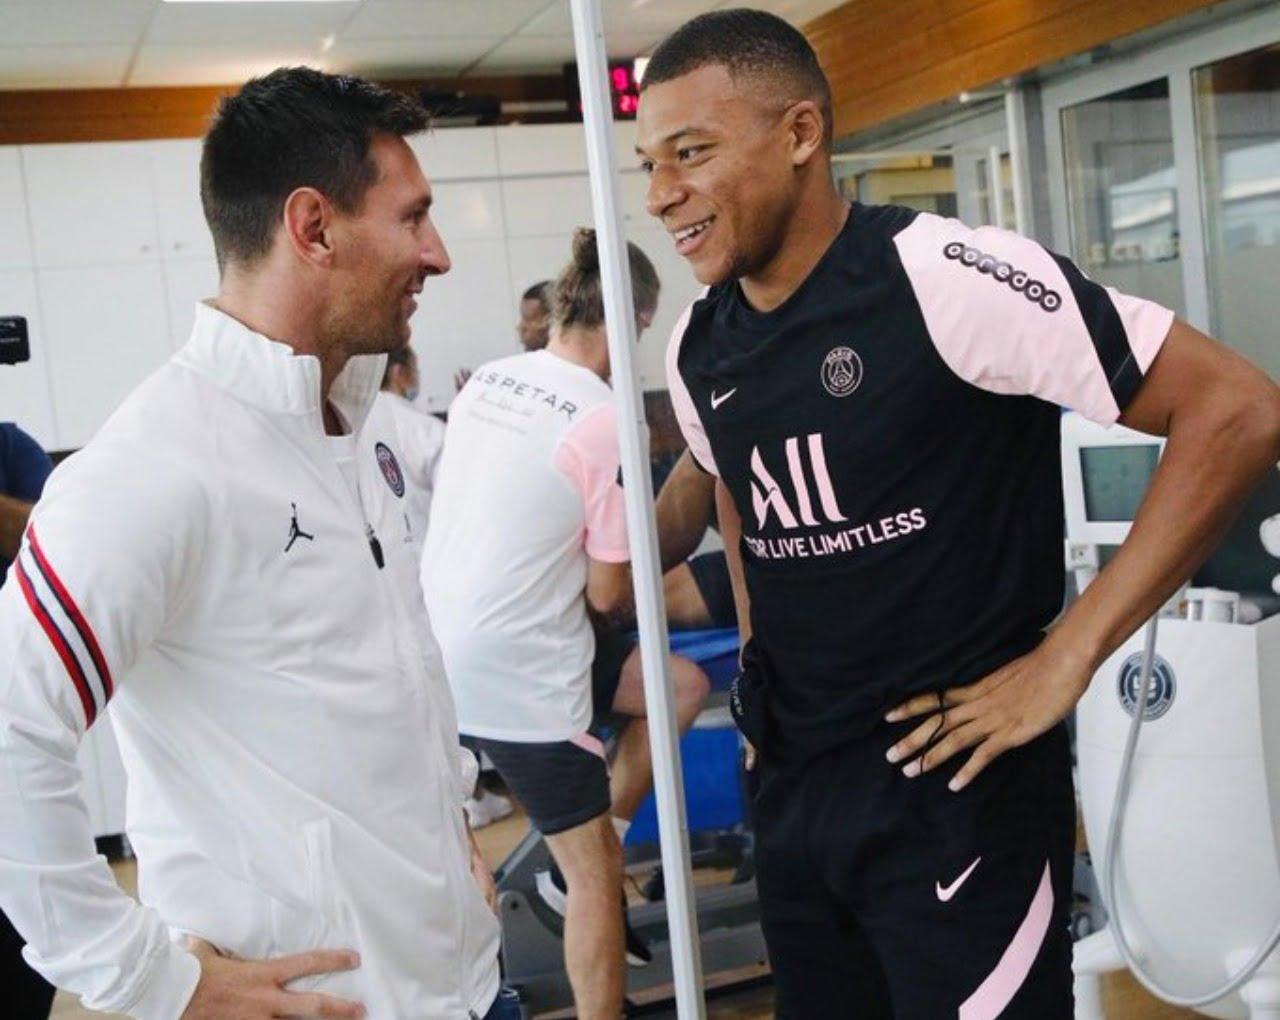 PSG: It’s an honour to play with you – Mbappe sends message to Messi